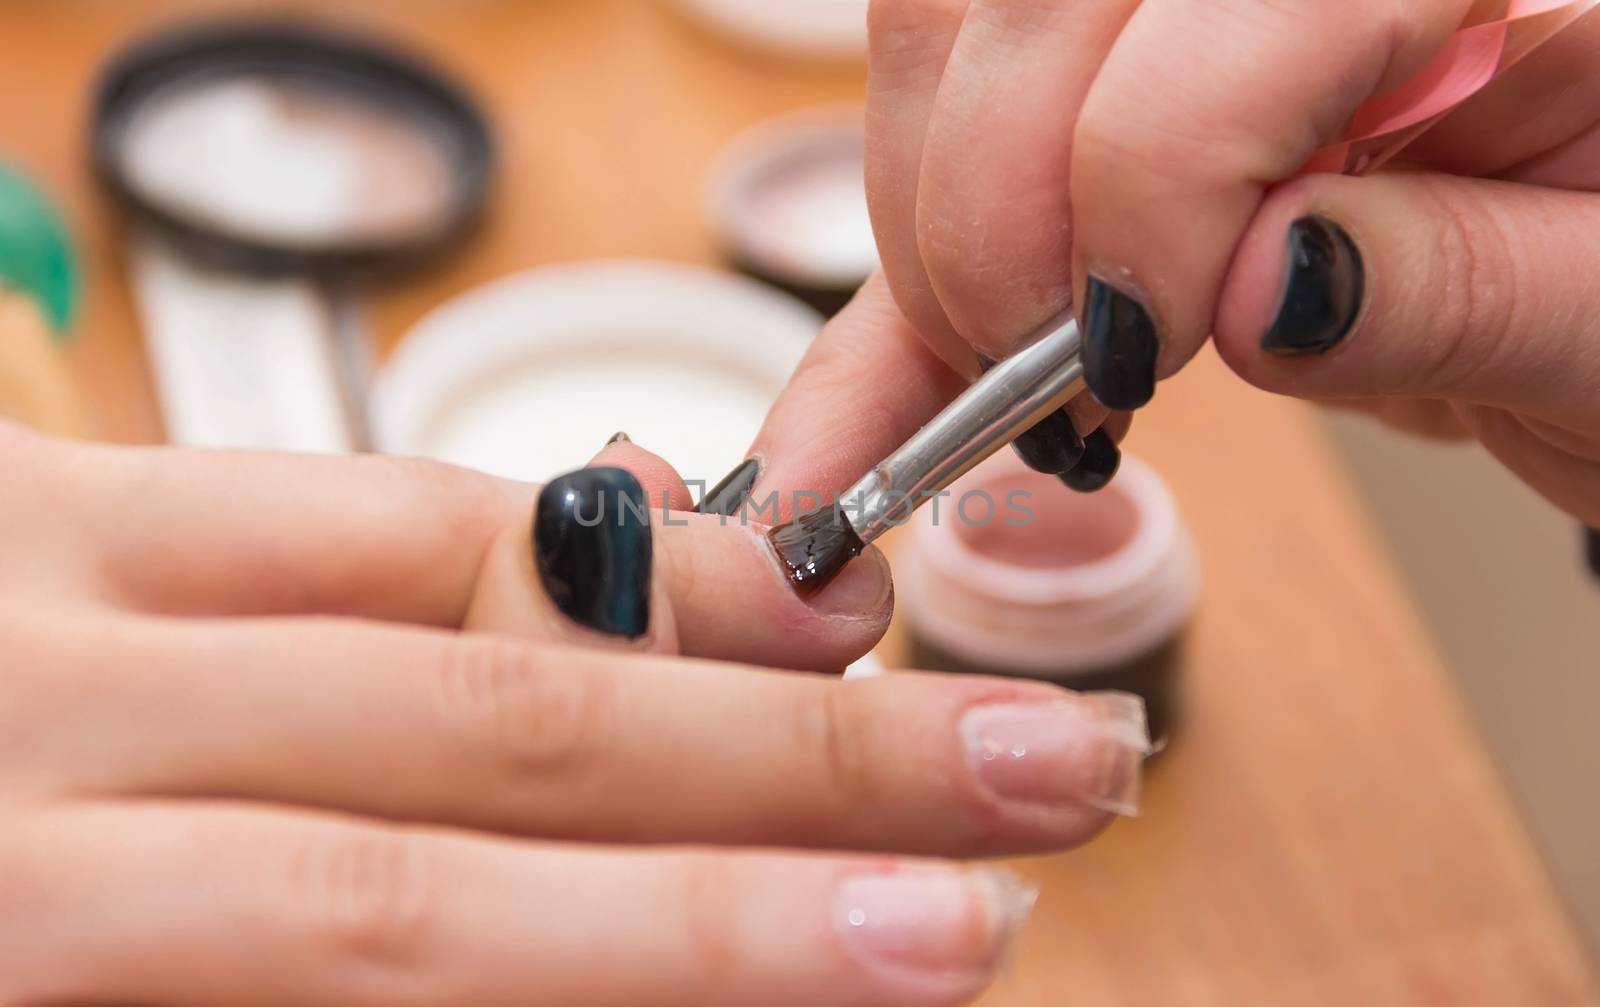 build artificial nails, manicures, artificial nails correction, the industry of beauty and nail care, beauty salons, a process of increasing, in the hands, nail esthetics, soft focus